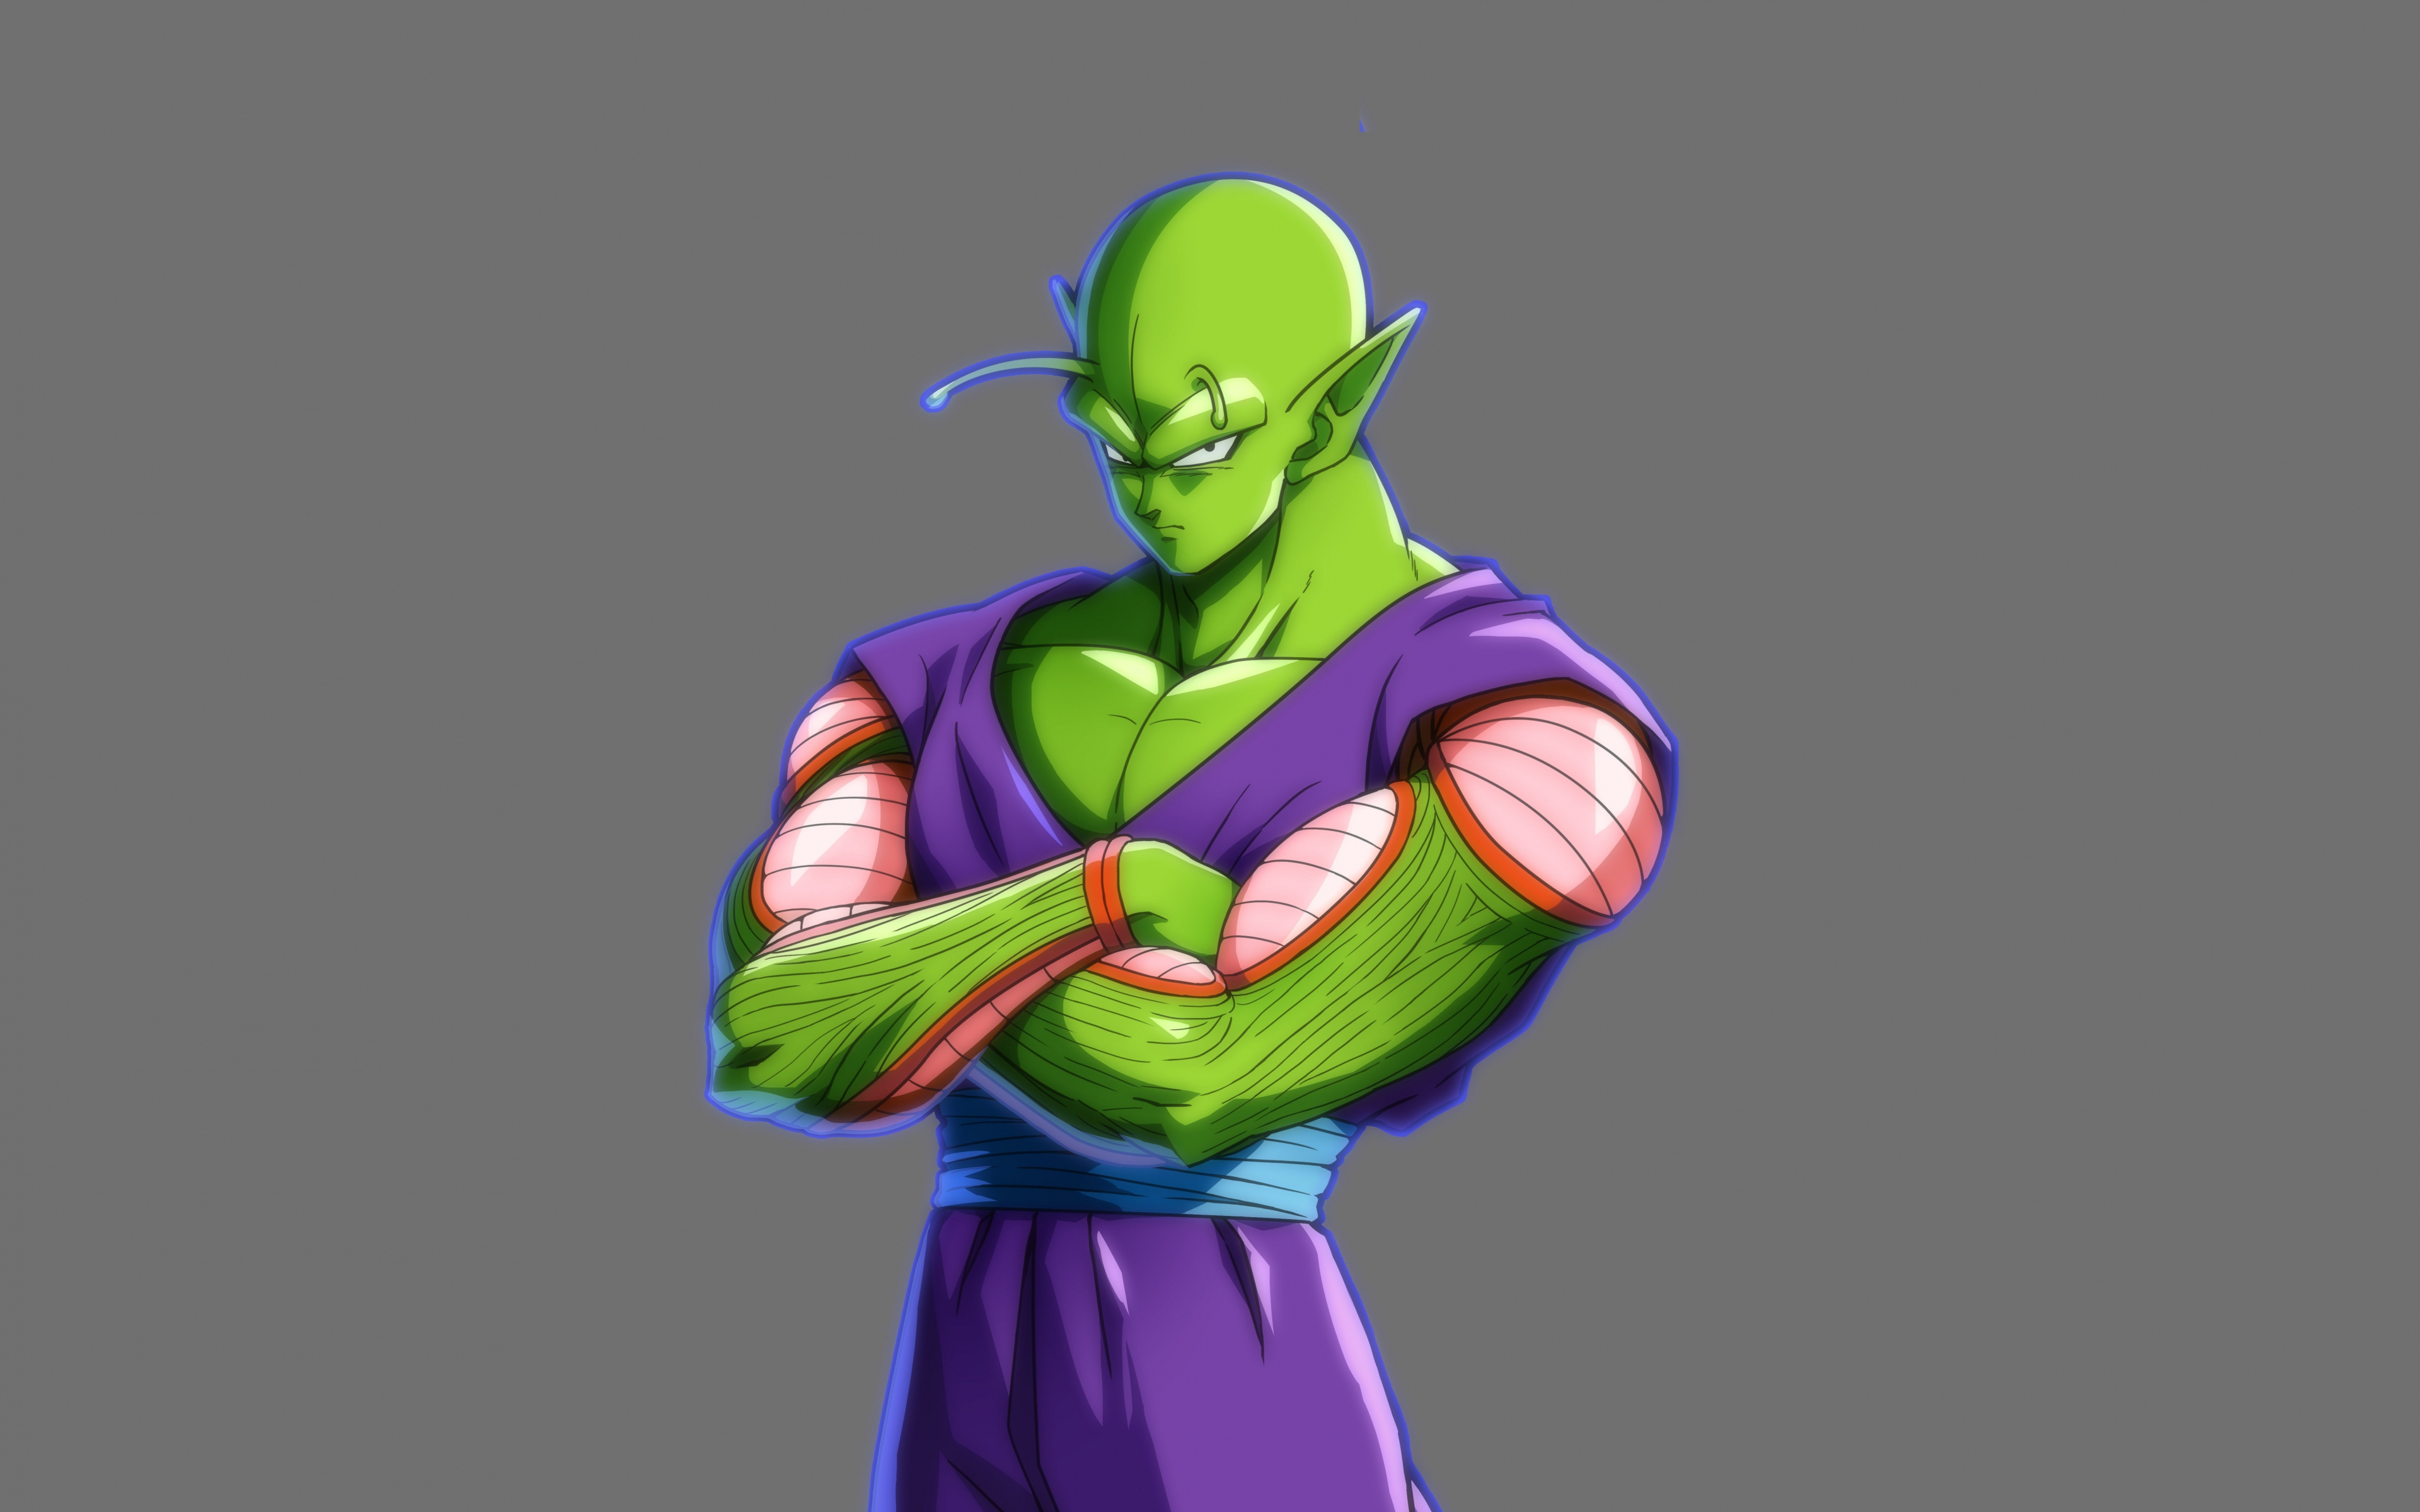 Download 3840x2400 Wallpaper Piccolo Dragon Ball Fighterz Video Game Anime 4k Ultra Hd 16 10 Widescreen 3840x2400 Hd Image Background 6249